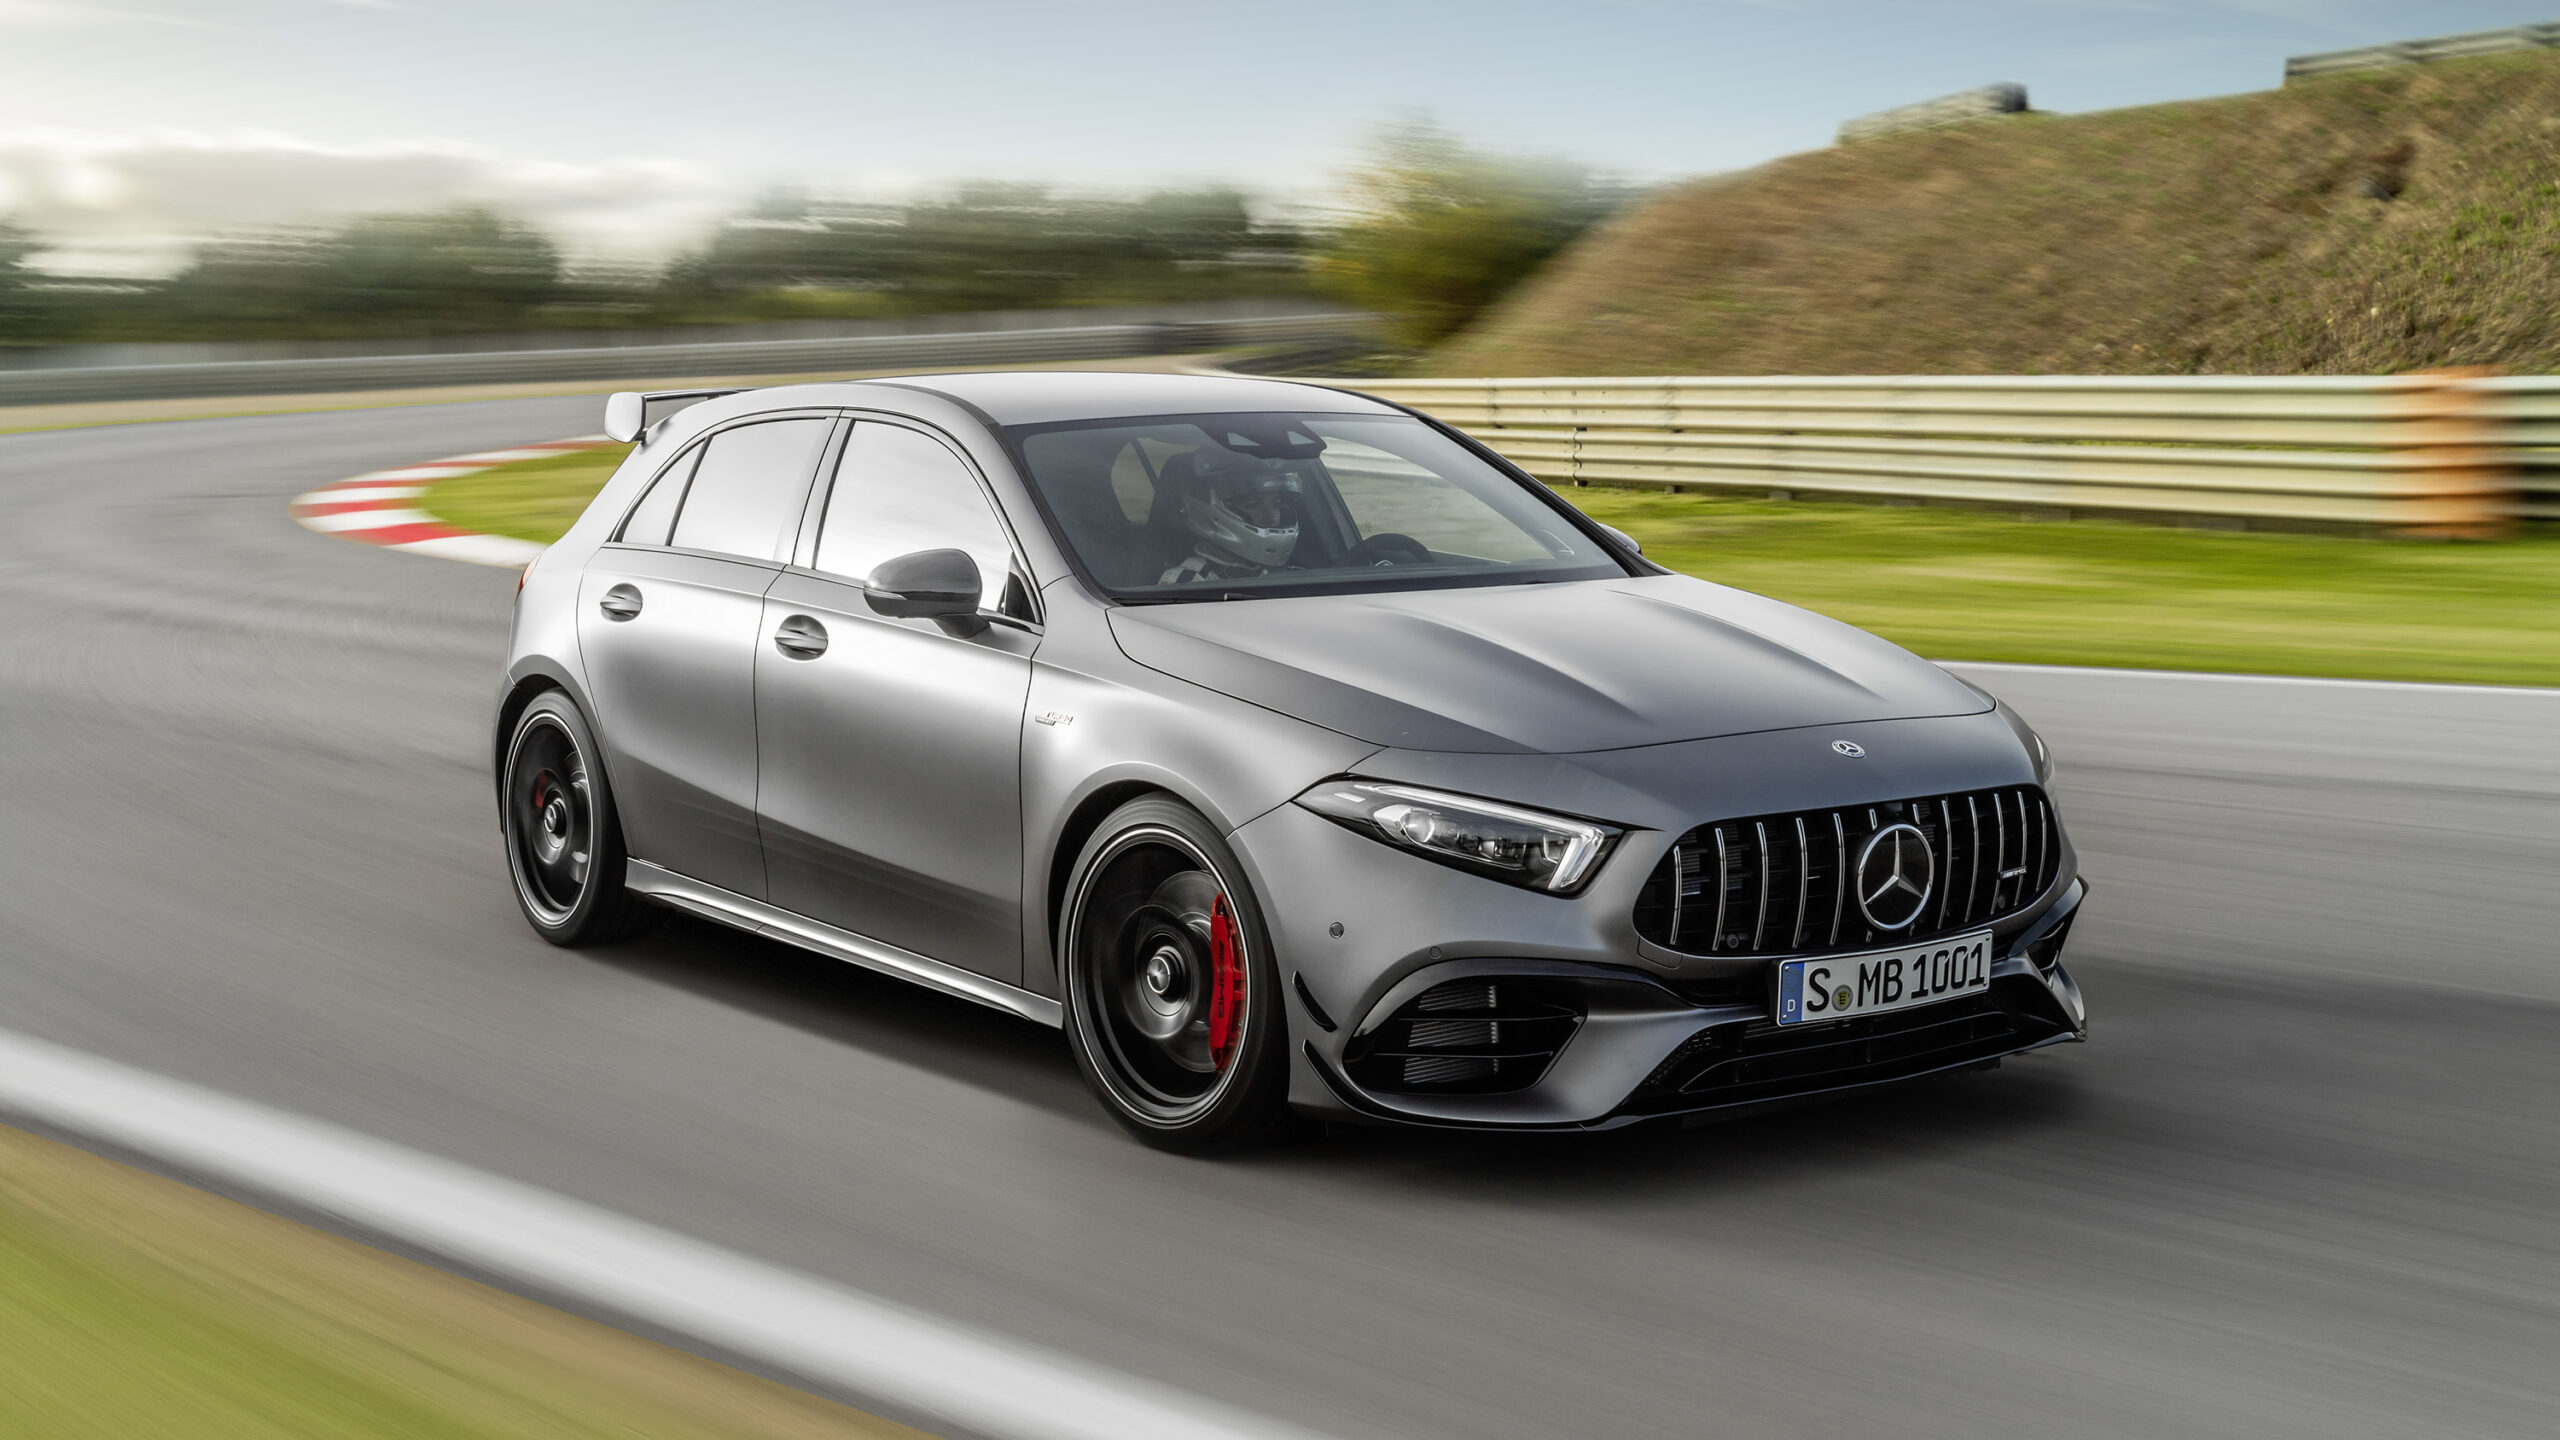 Fastest Hot Hatches On The Market Right Now: AMG A45S